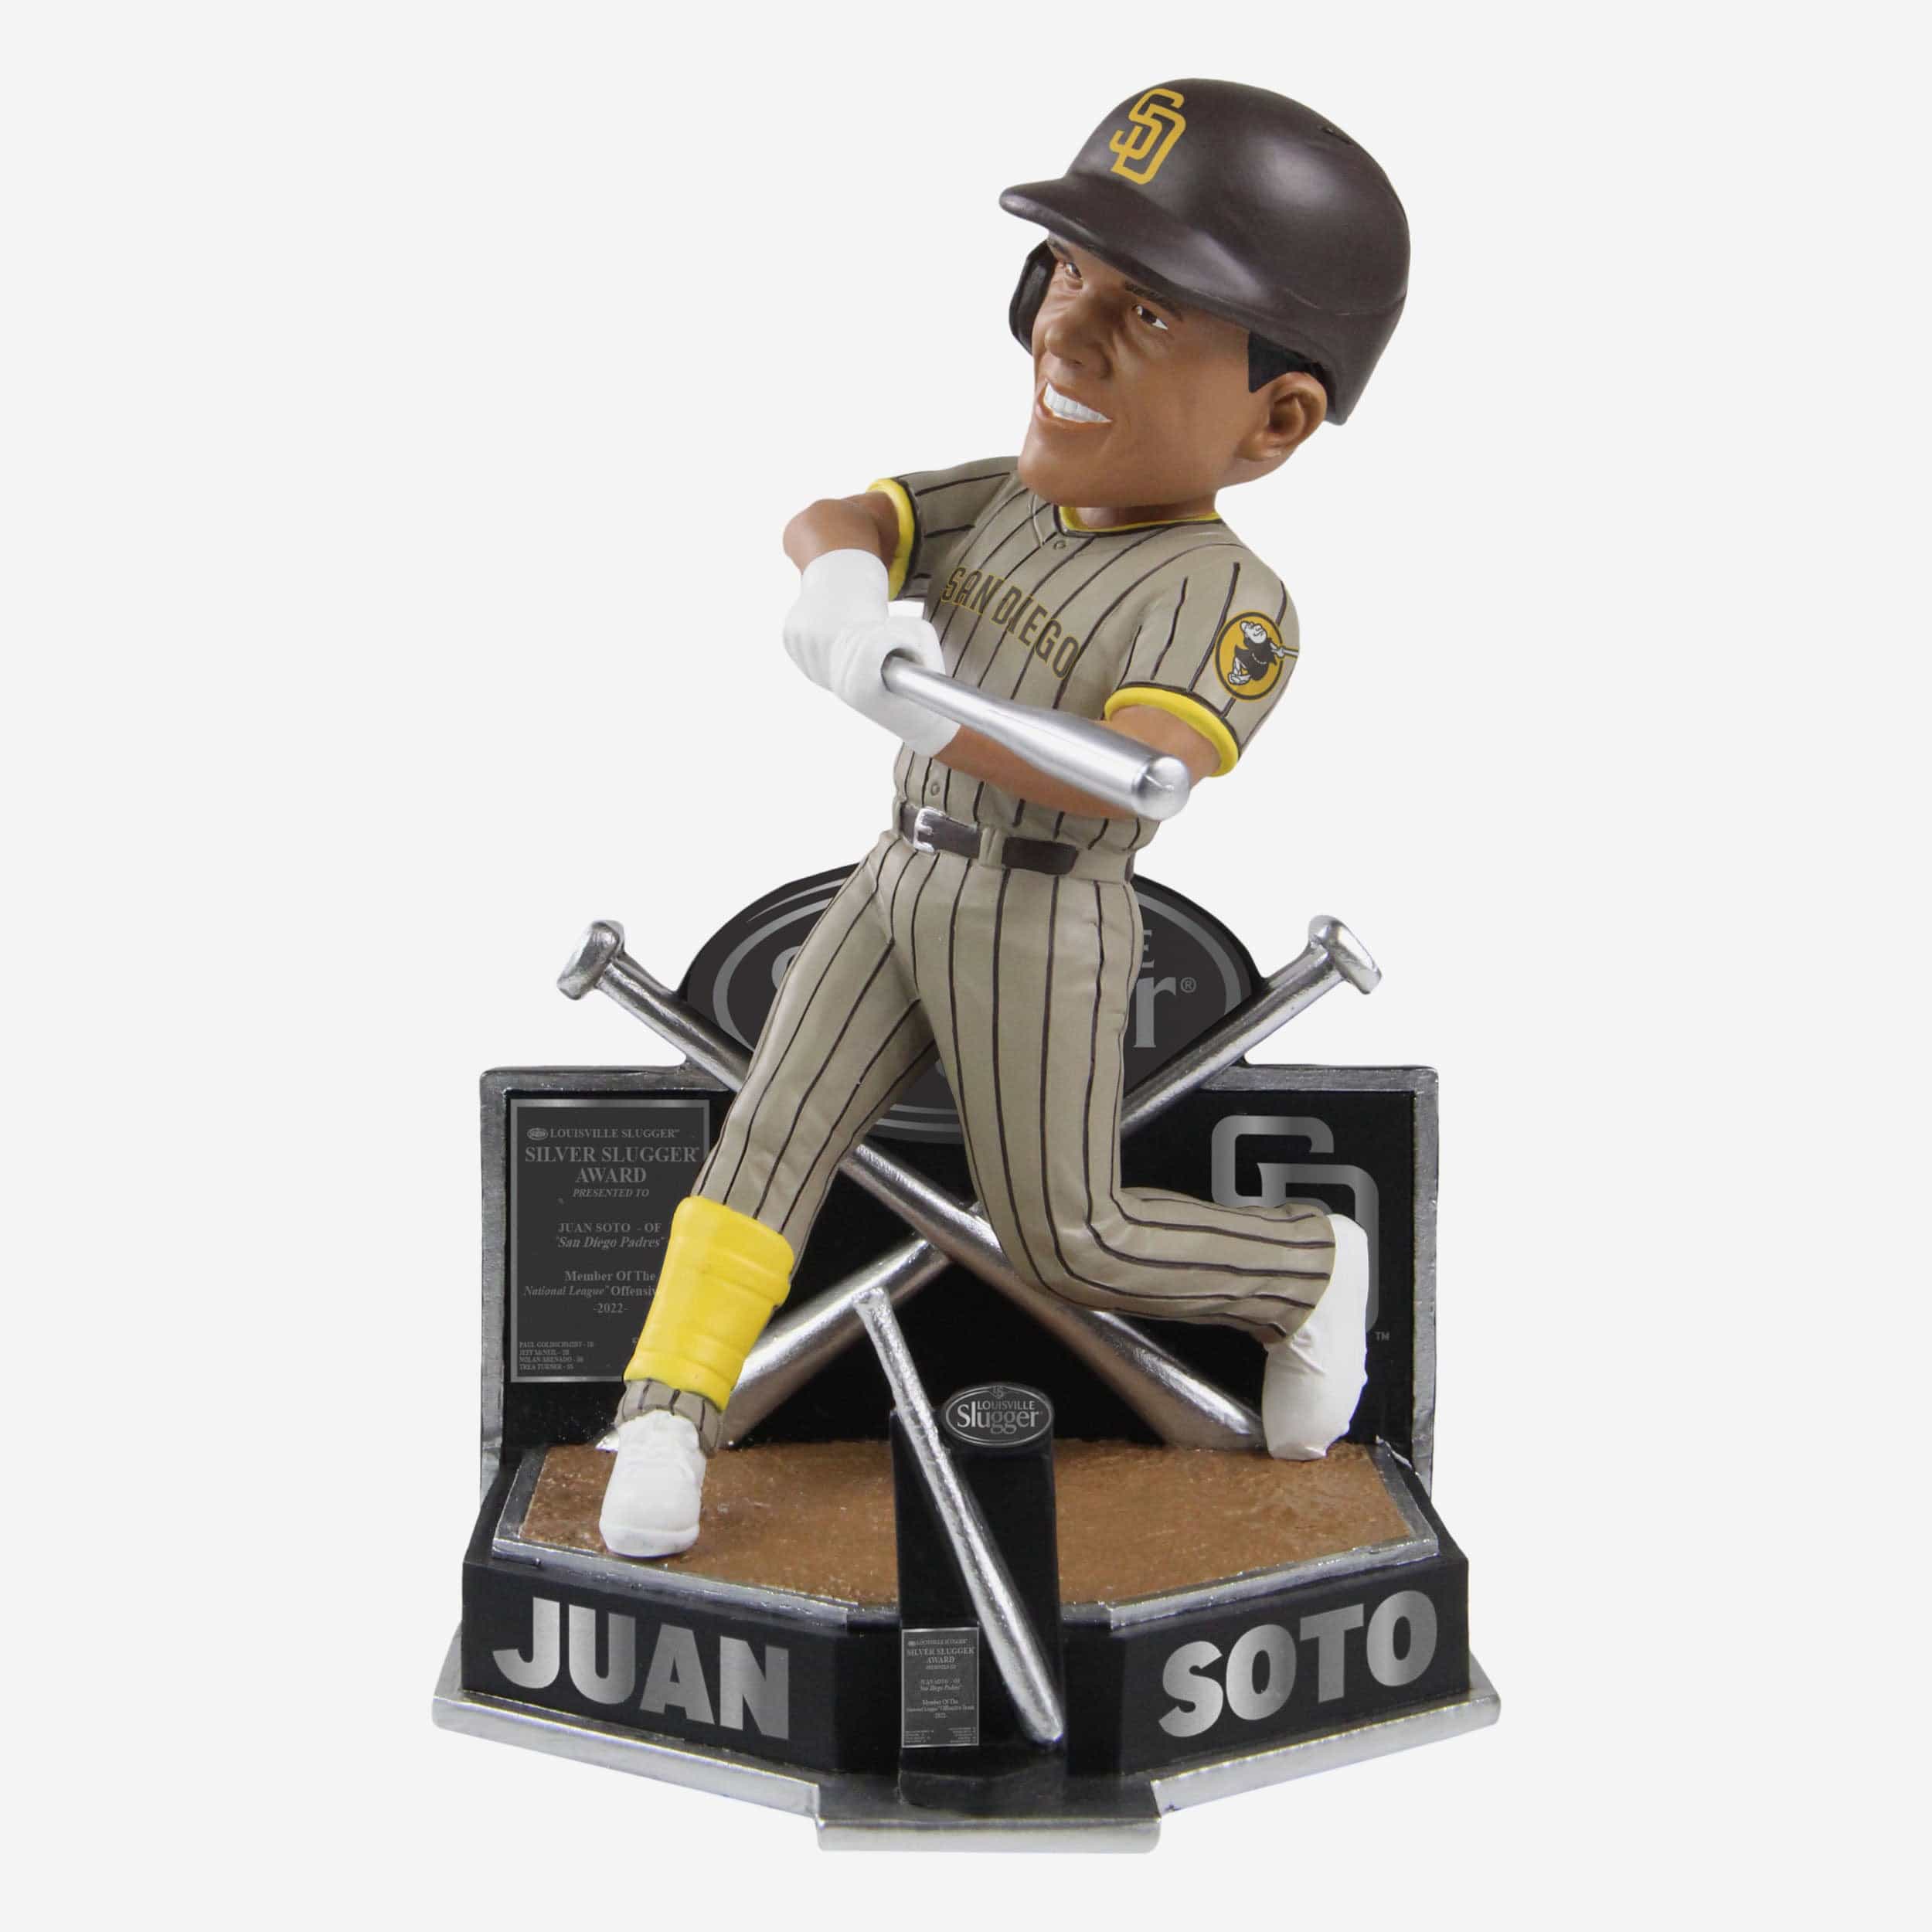 San Diego Padres: Juan Soto 2022 - Officially Licensed MLB